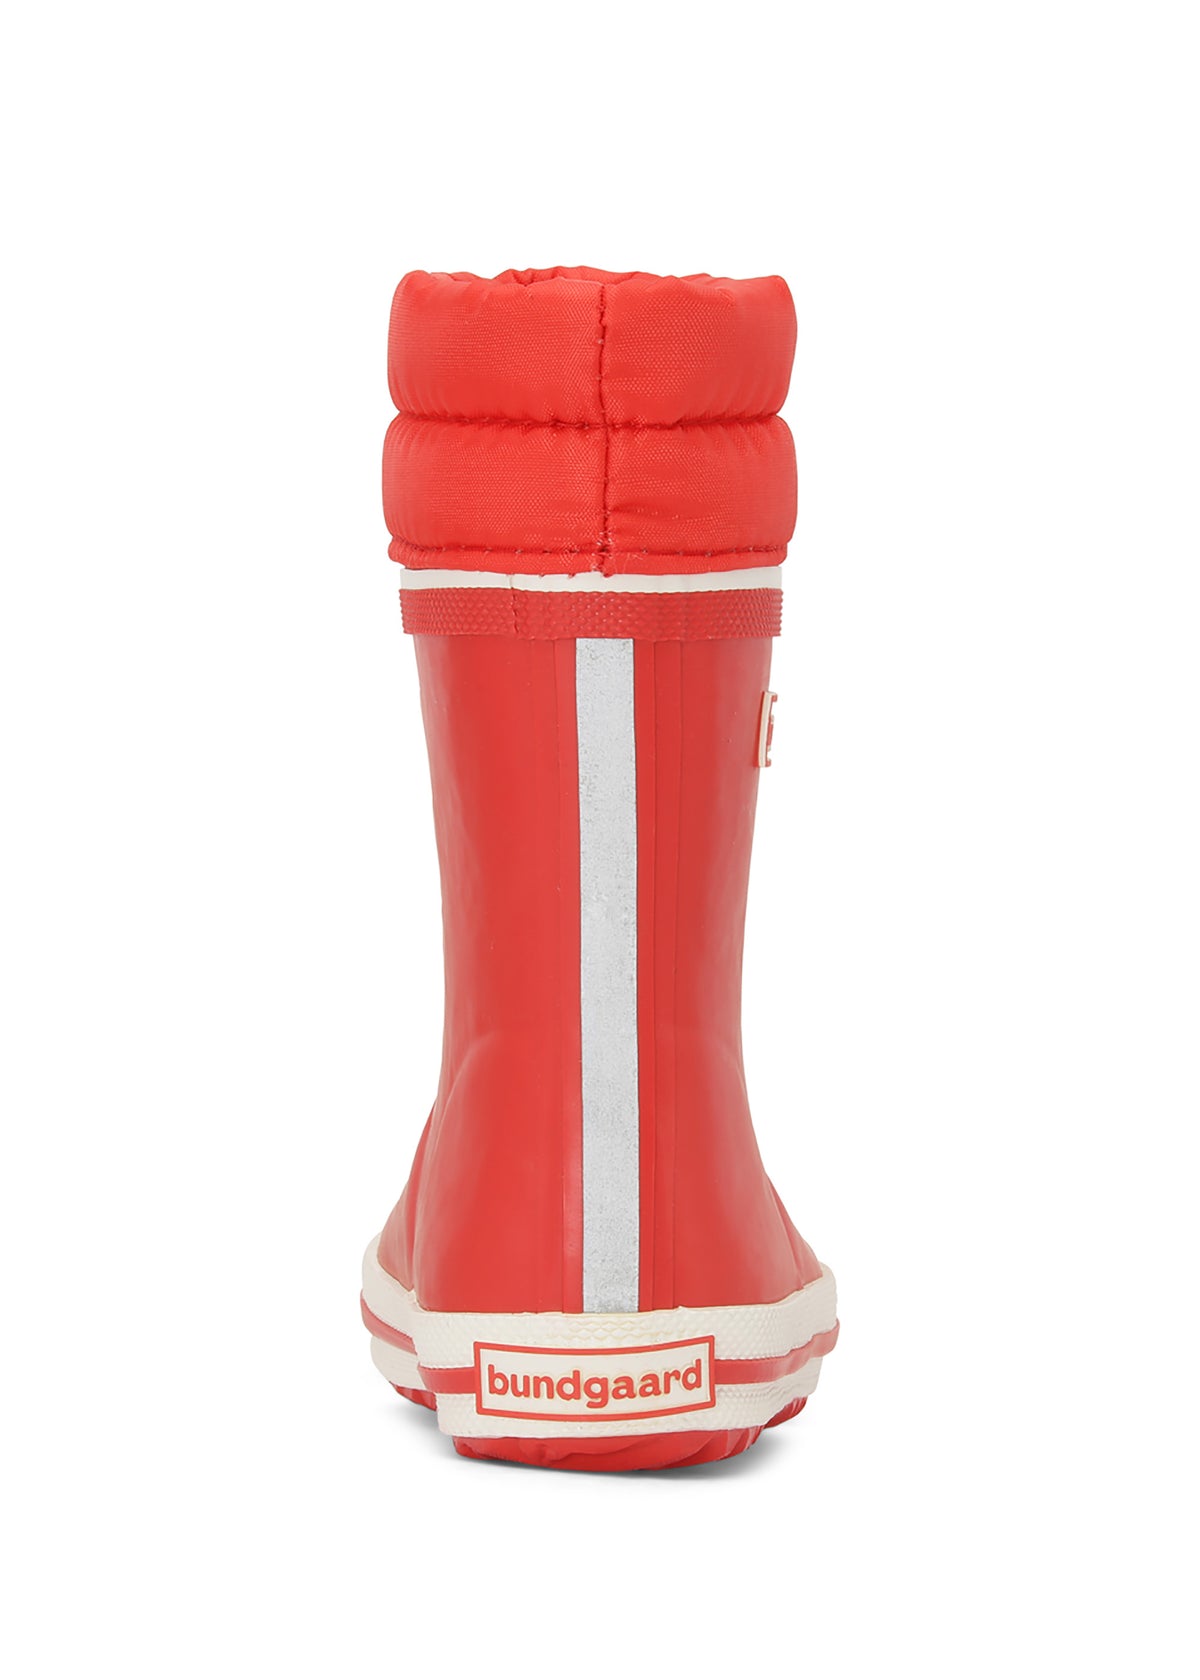 Rubber boots with a warm lining - red, drawstrings, Cirro High Warm